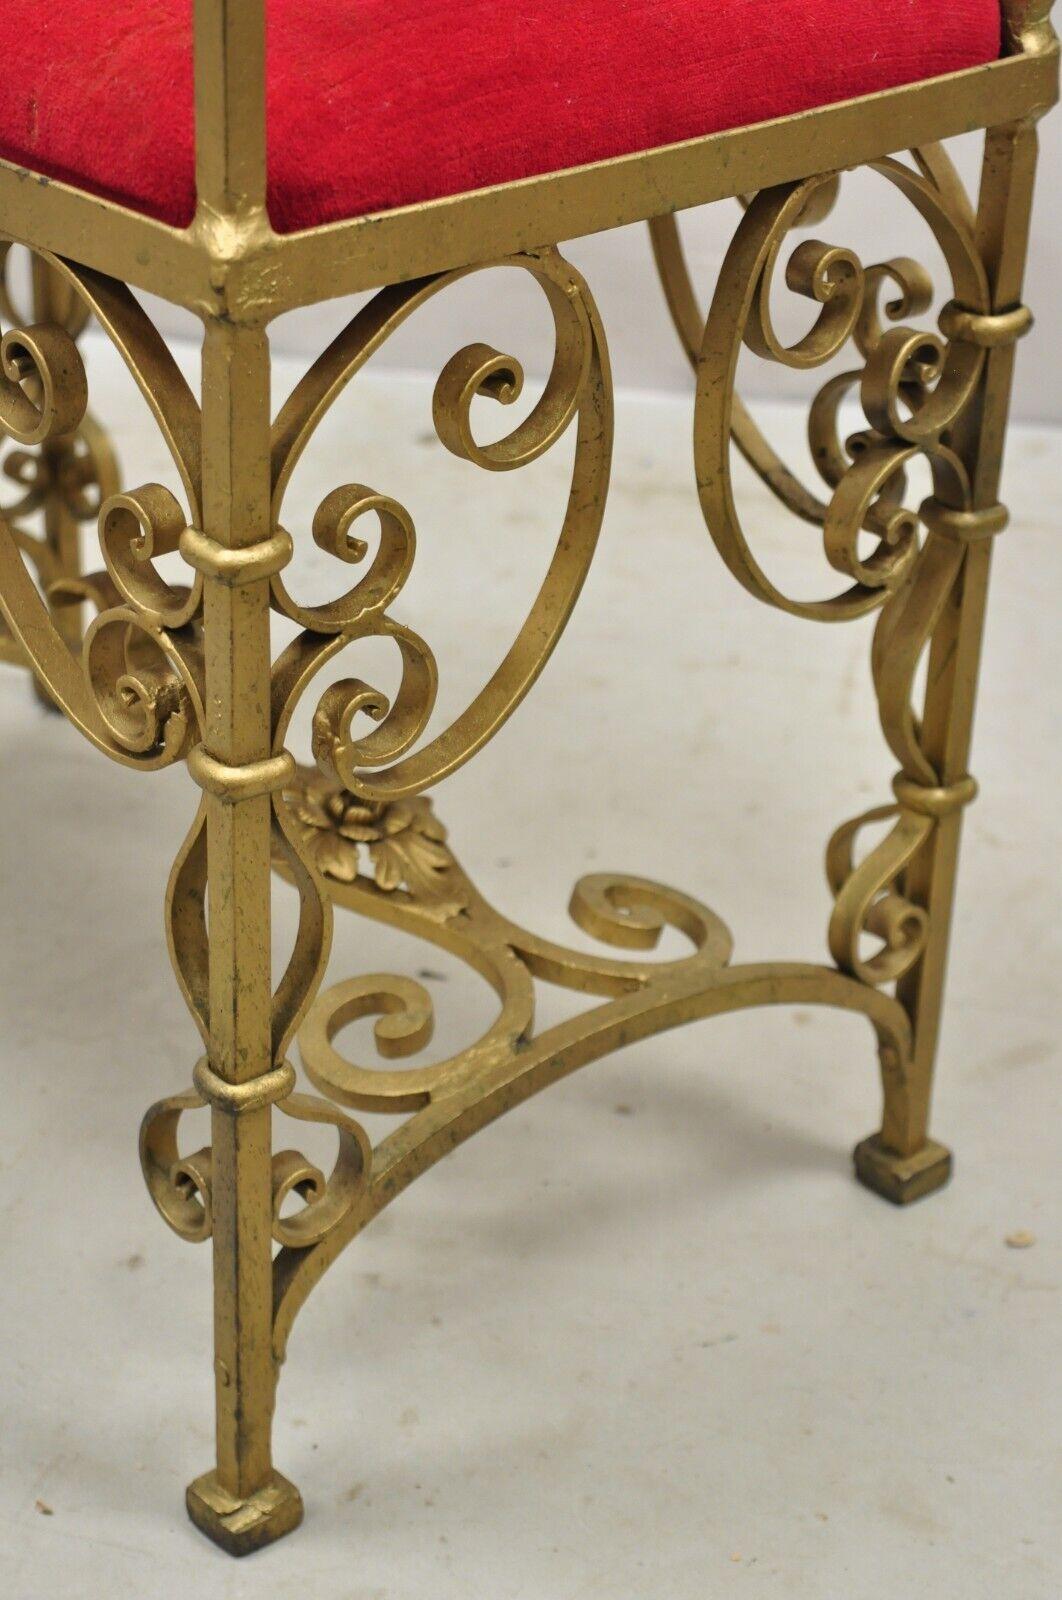 Vintage Gold Hollywood Regency Gothic Iron Scrolling Vanity Bench Seat Stool For Sale 5